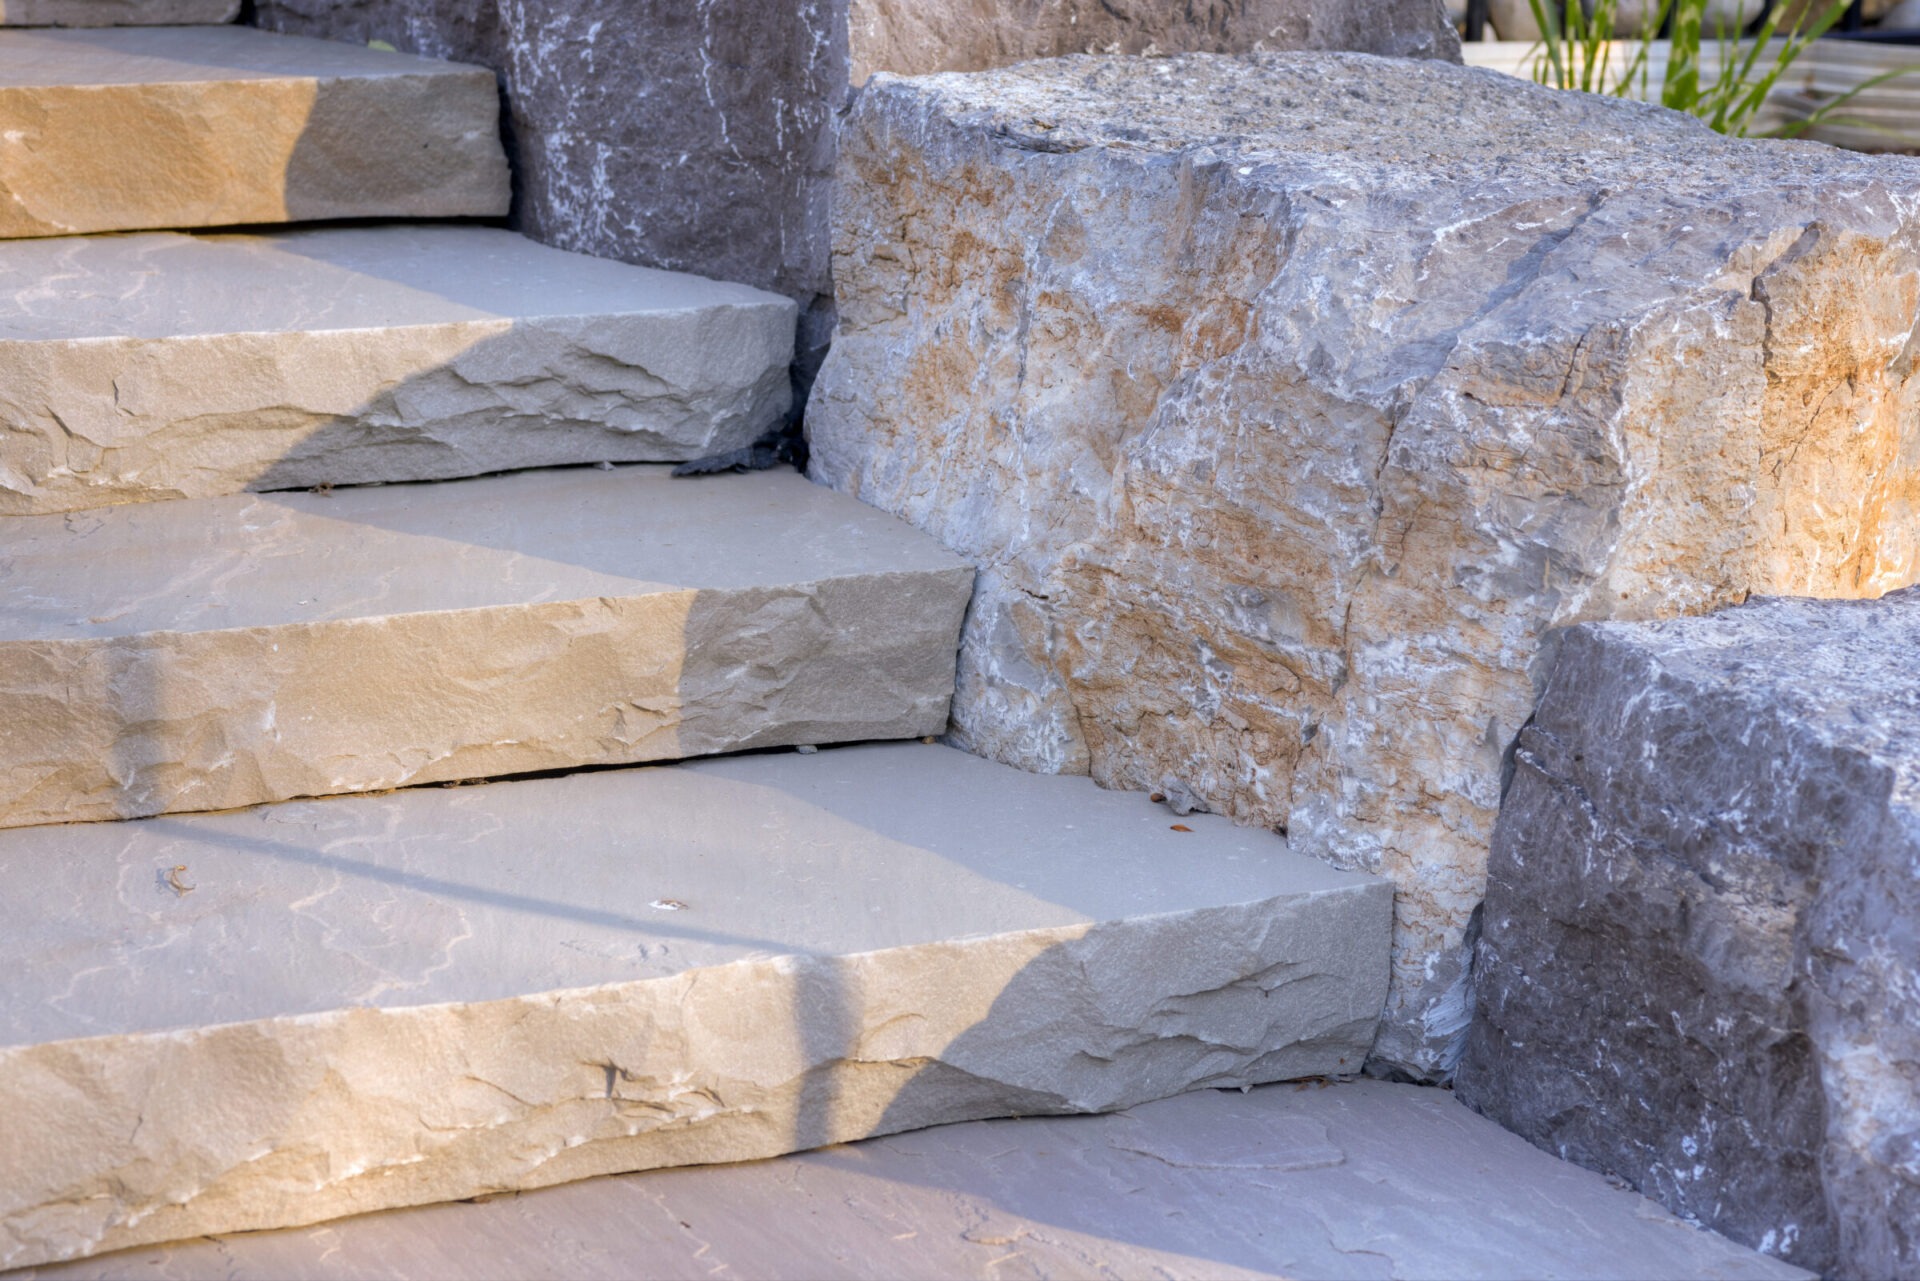 The image shows a set of outdoor stairs made from large textured stone blocks, with sunlight casting shadows on the steps.